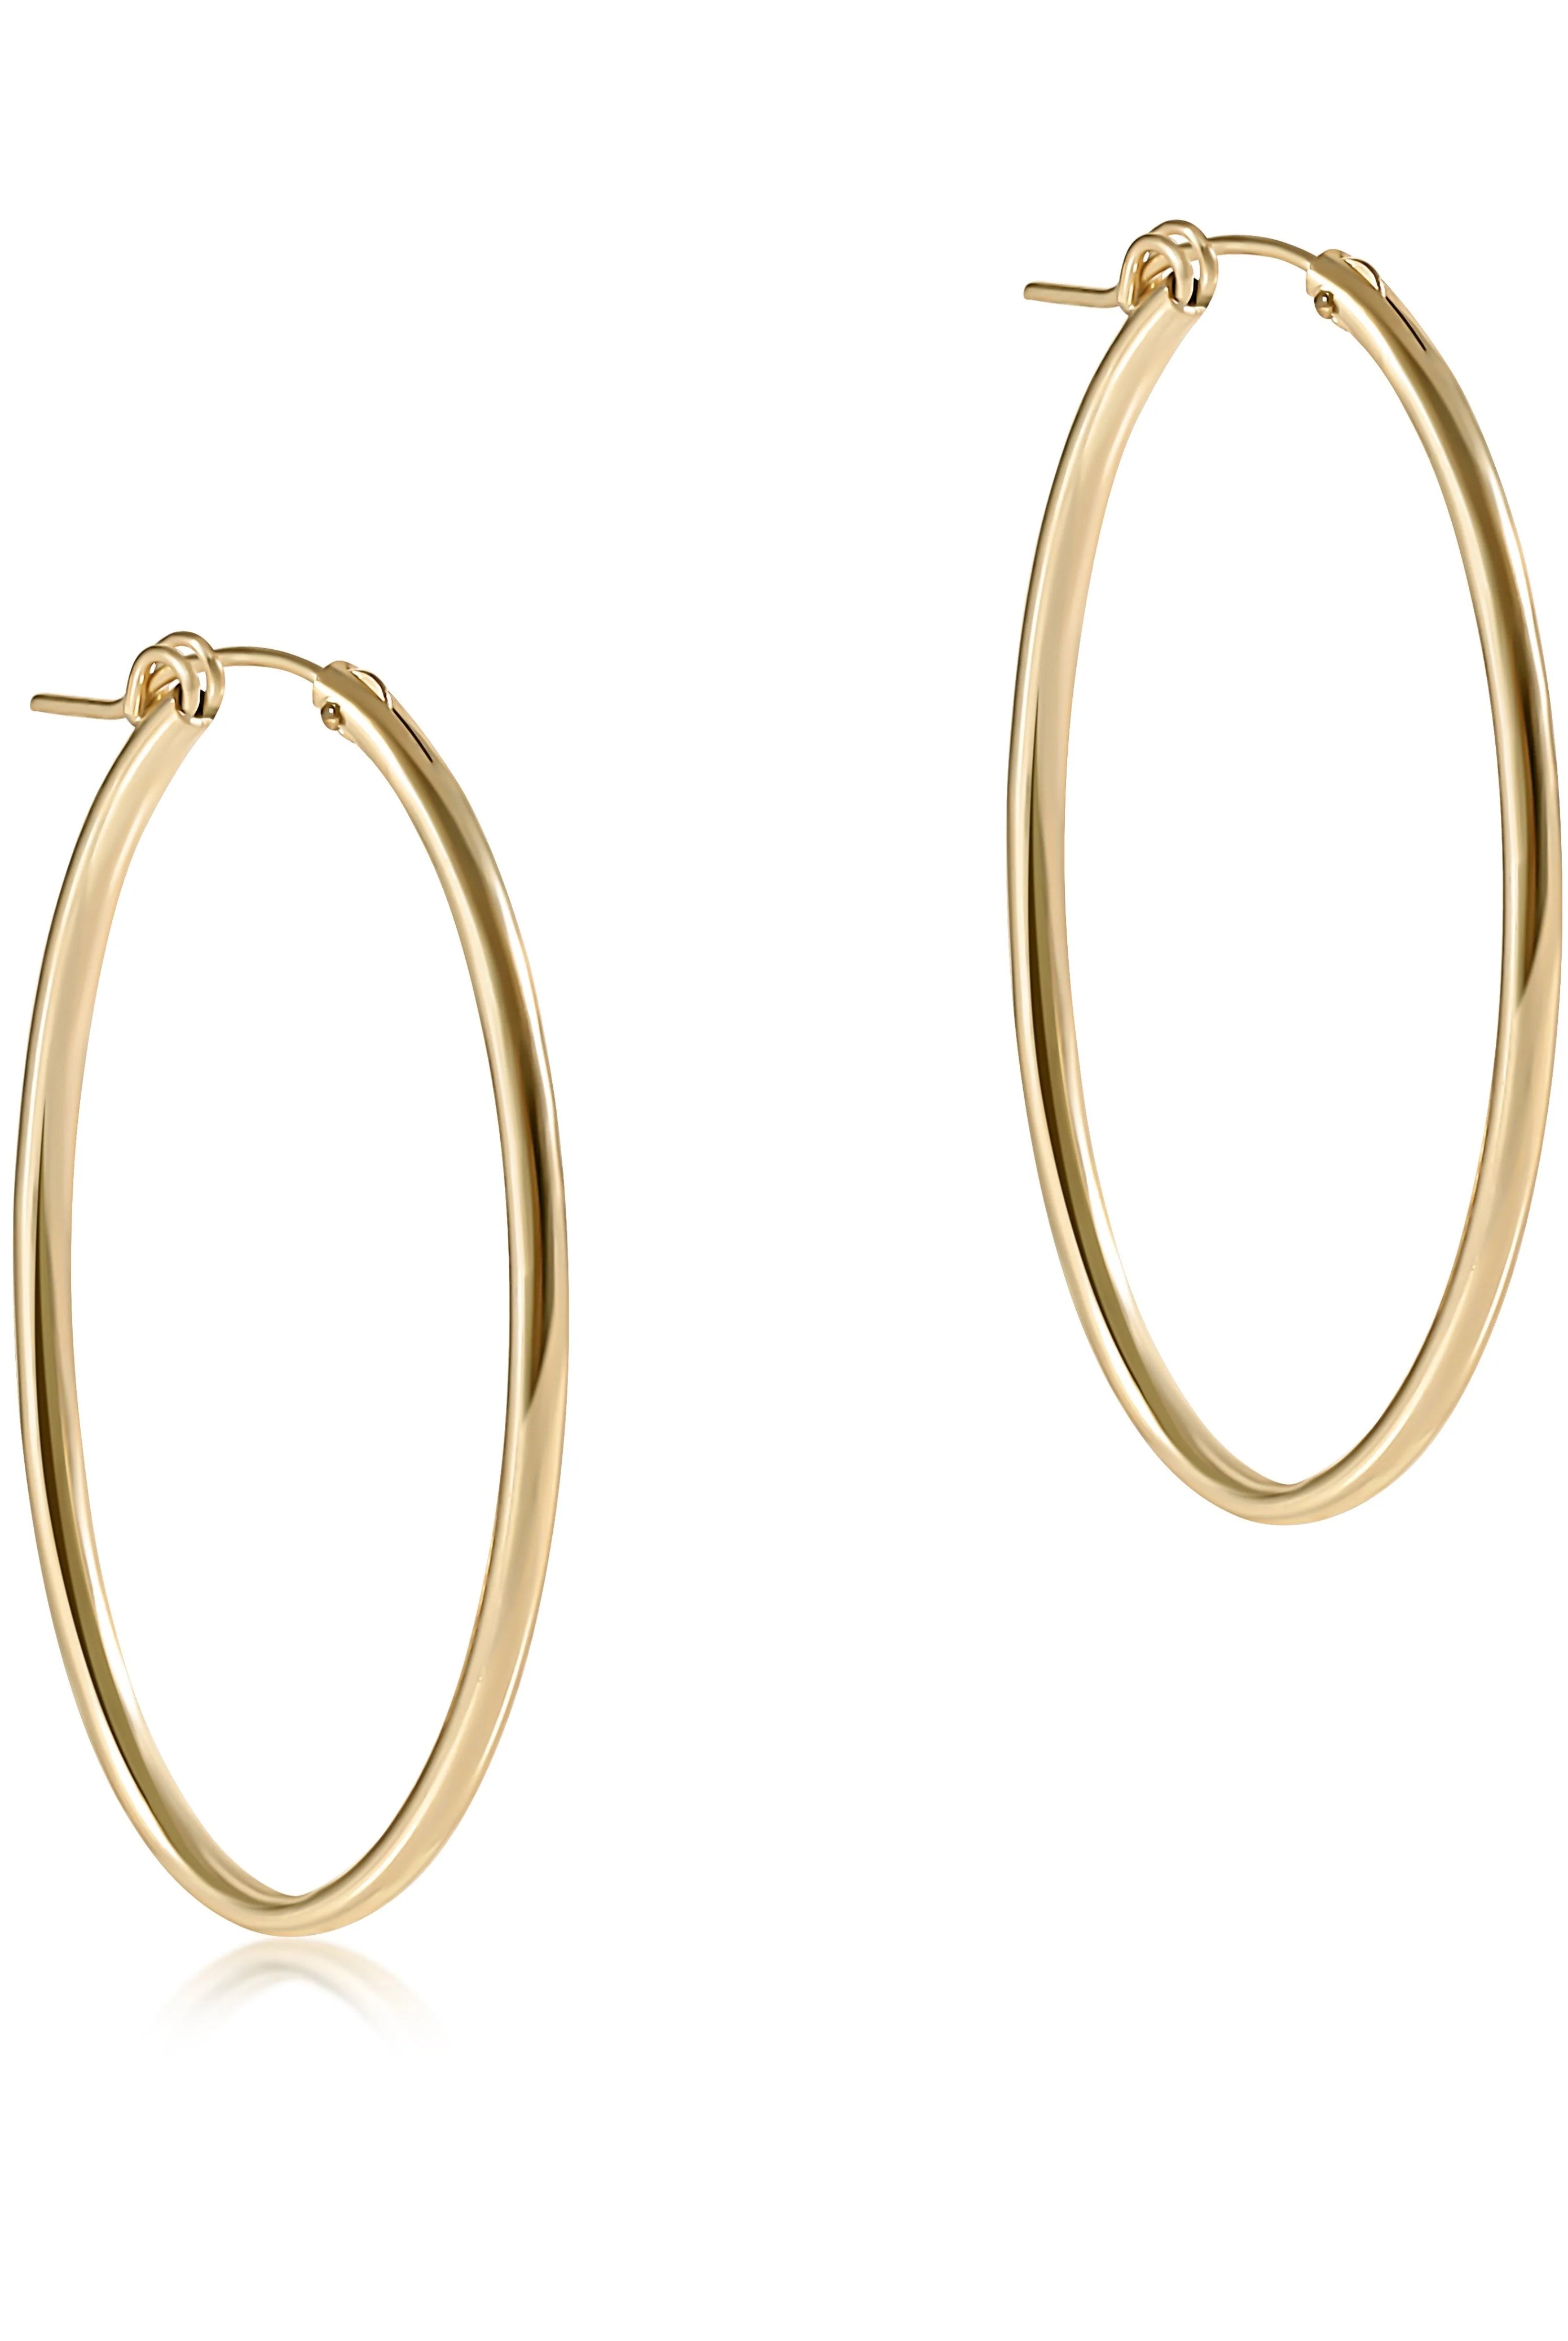 Oval Gold 2" Hoop Smooth Earring-260 eNewton-eNewton-The Lovely Closet, Women's Fashion Boutique in Alexandria, KY